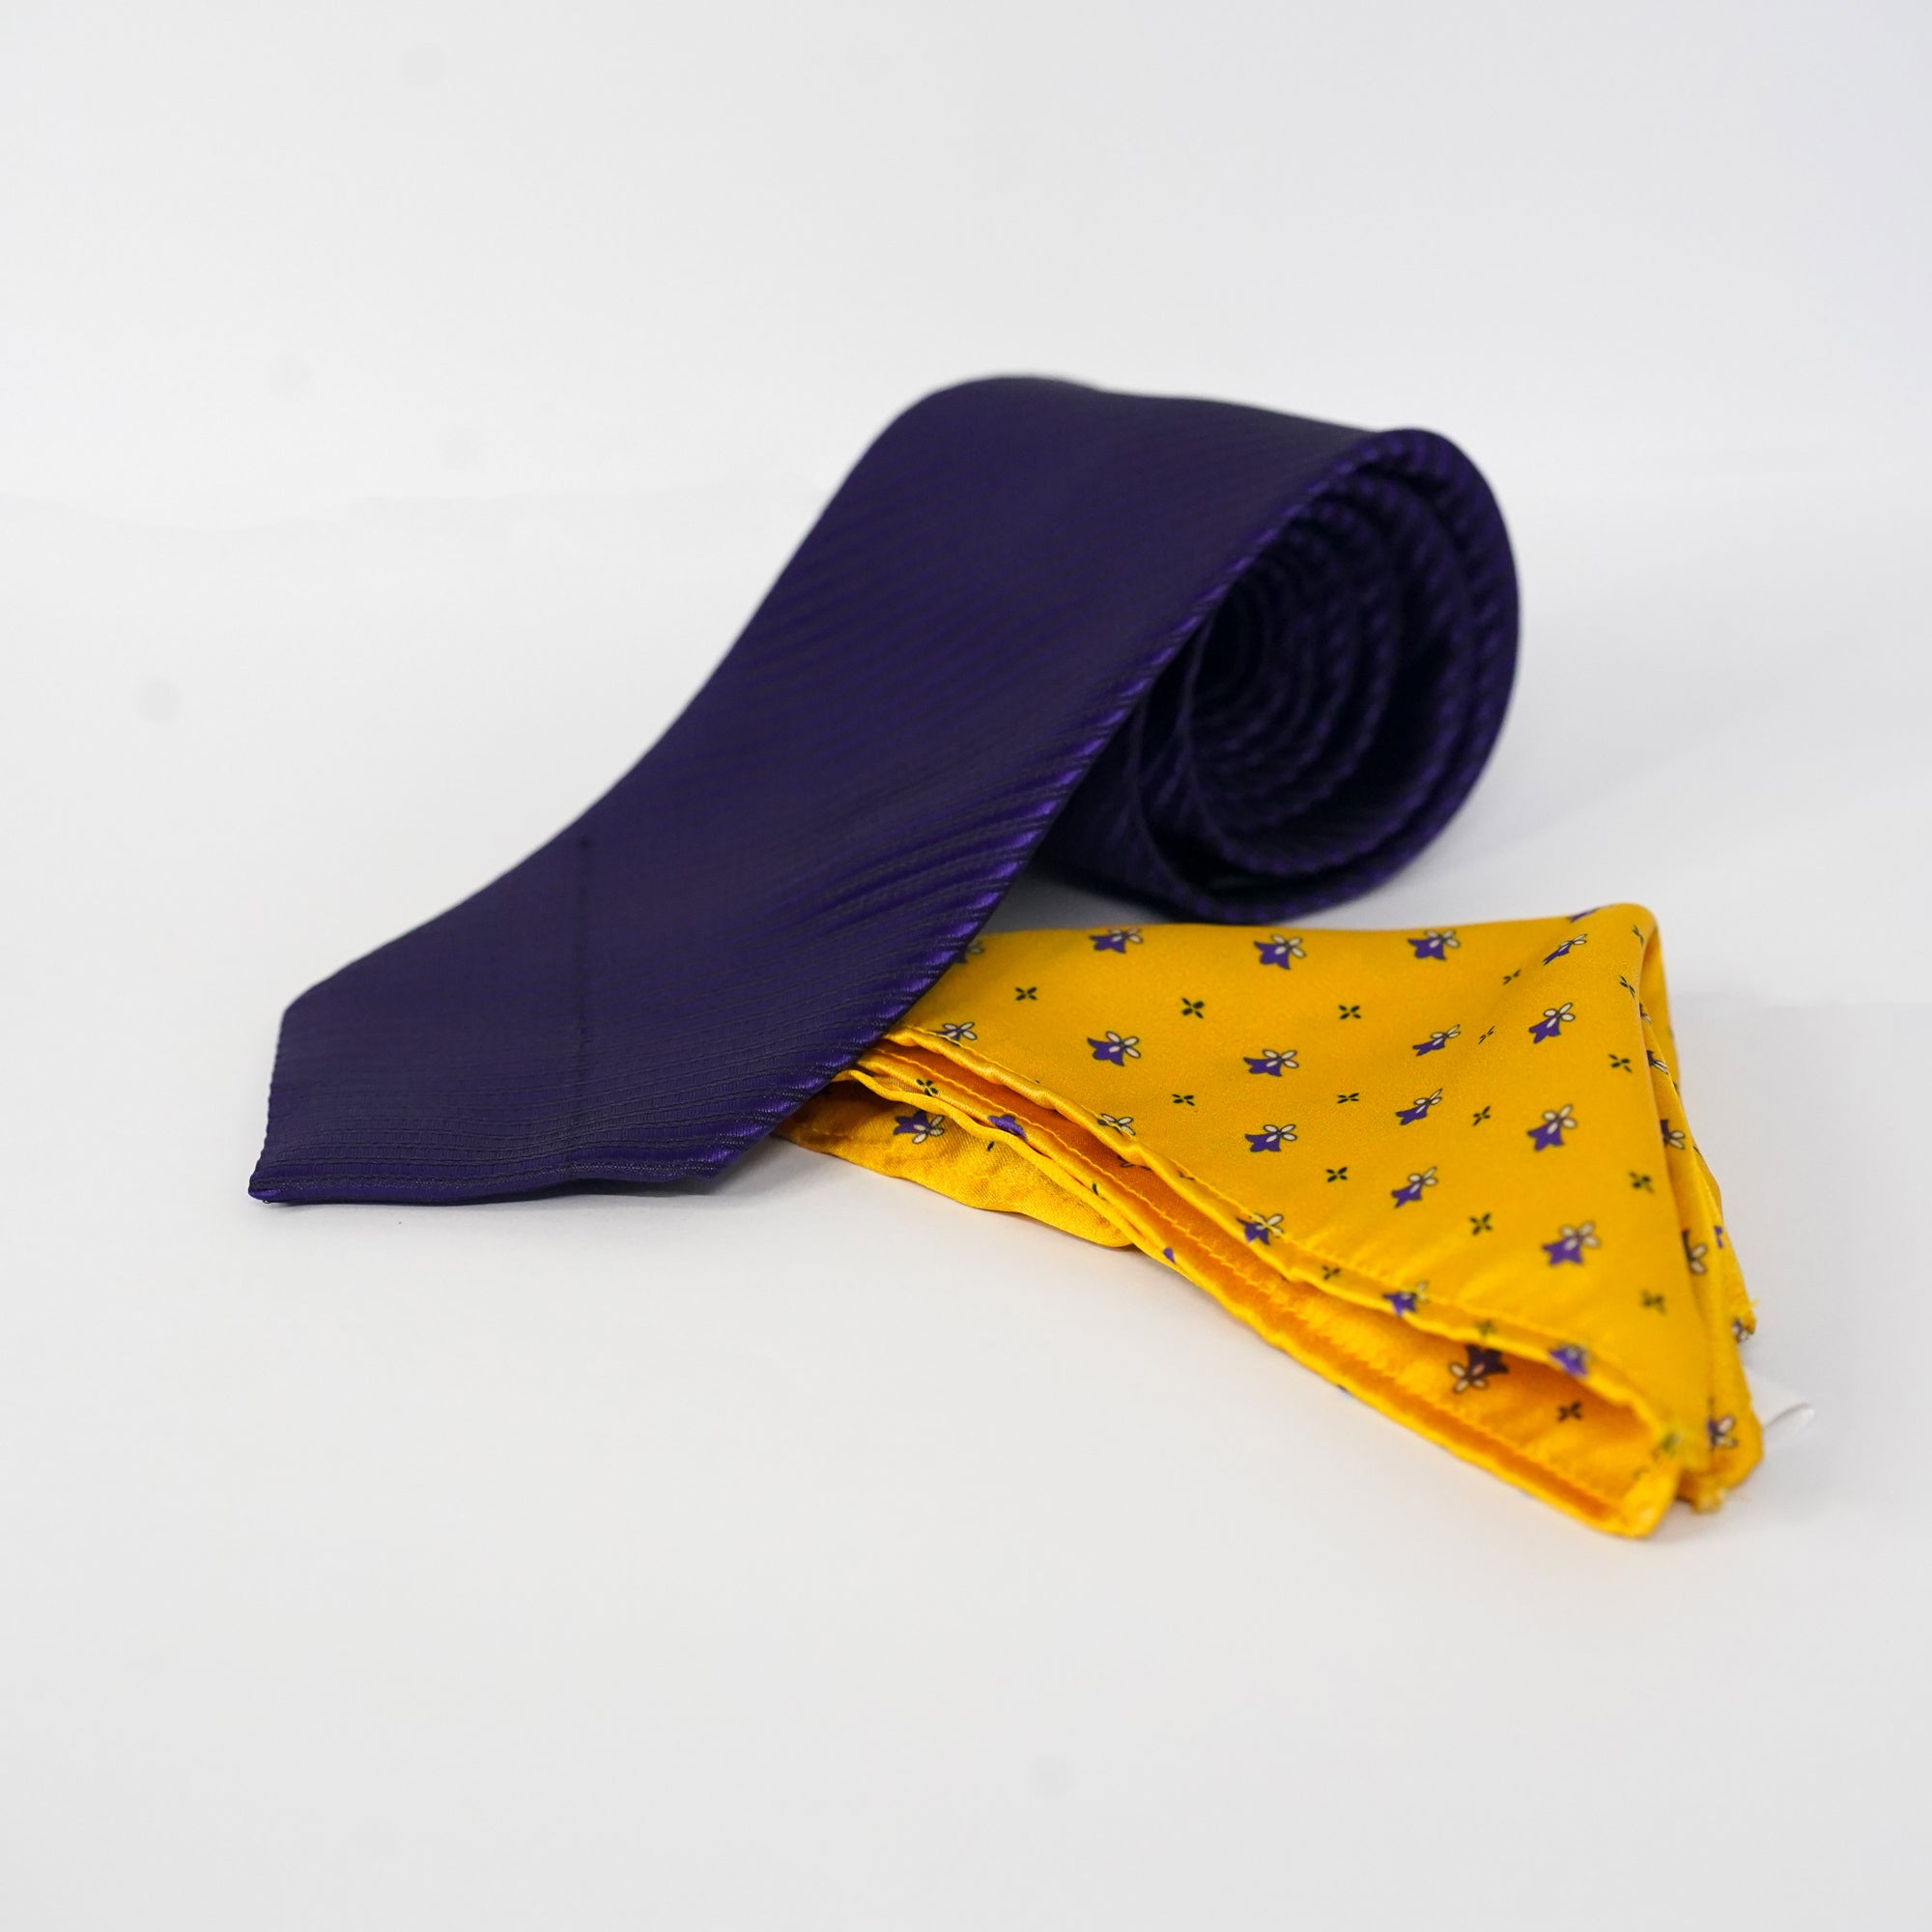 BUMBLEBEE POCKET SQUARE AND TIE SET